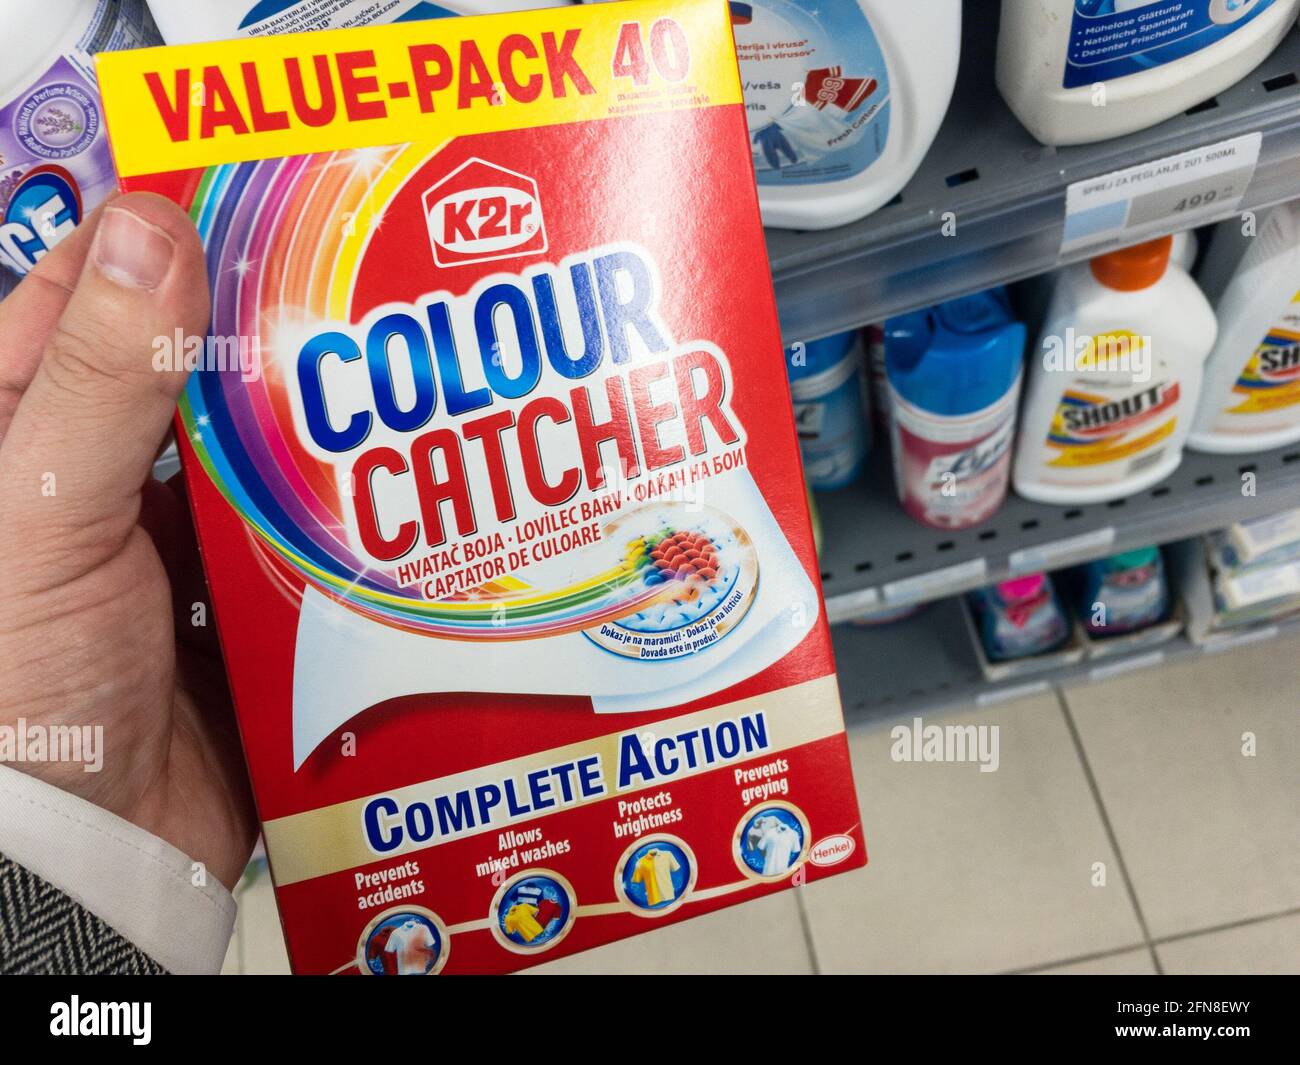 https://c8.alamy.com/comp/2FN8EWY/picture-of-a-pack-with-the-logo-of-k2r-colour-catcher-for-sale-k2r-colour-catcher-is-a-brand-of-sheets-and-wipes-made-for-color-absorption-in-laundry-2FN8EWY.jpg